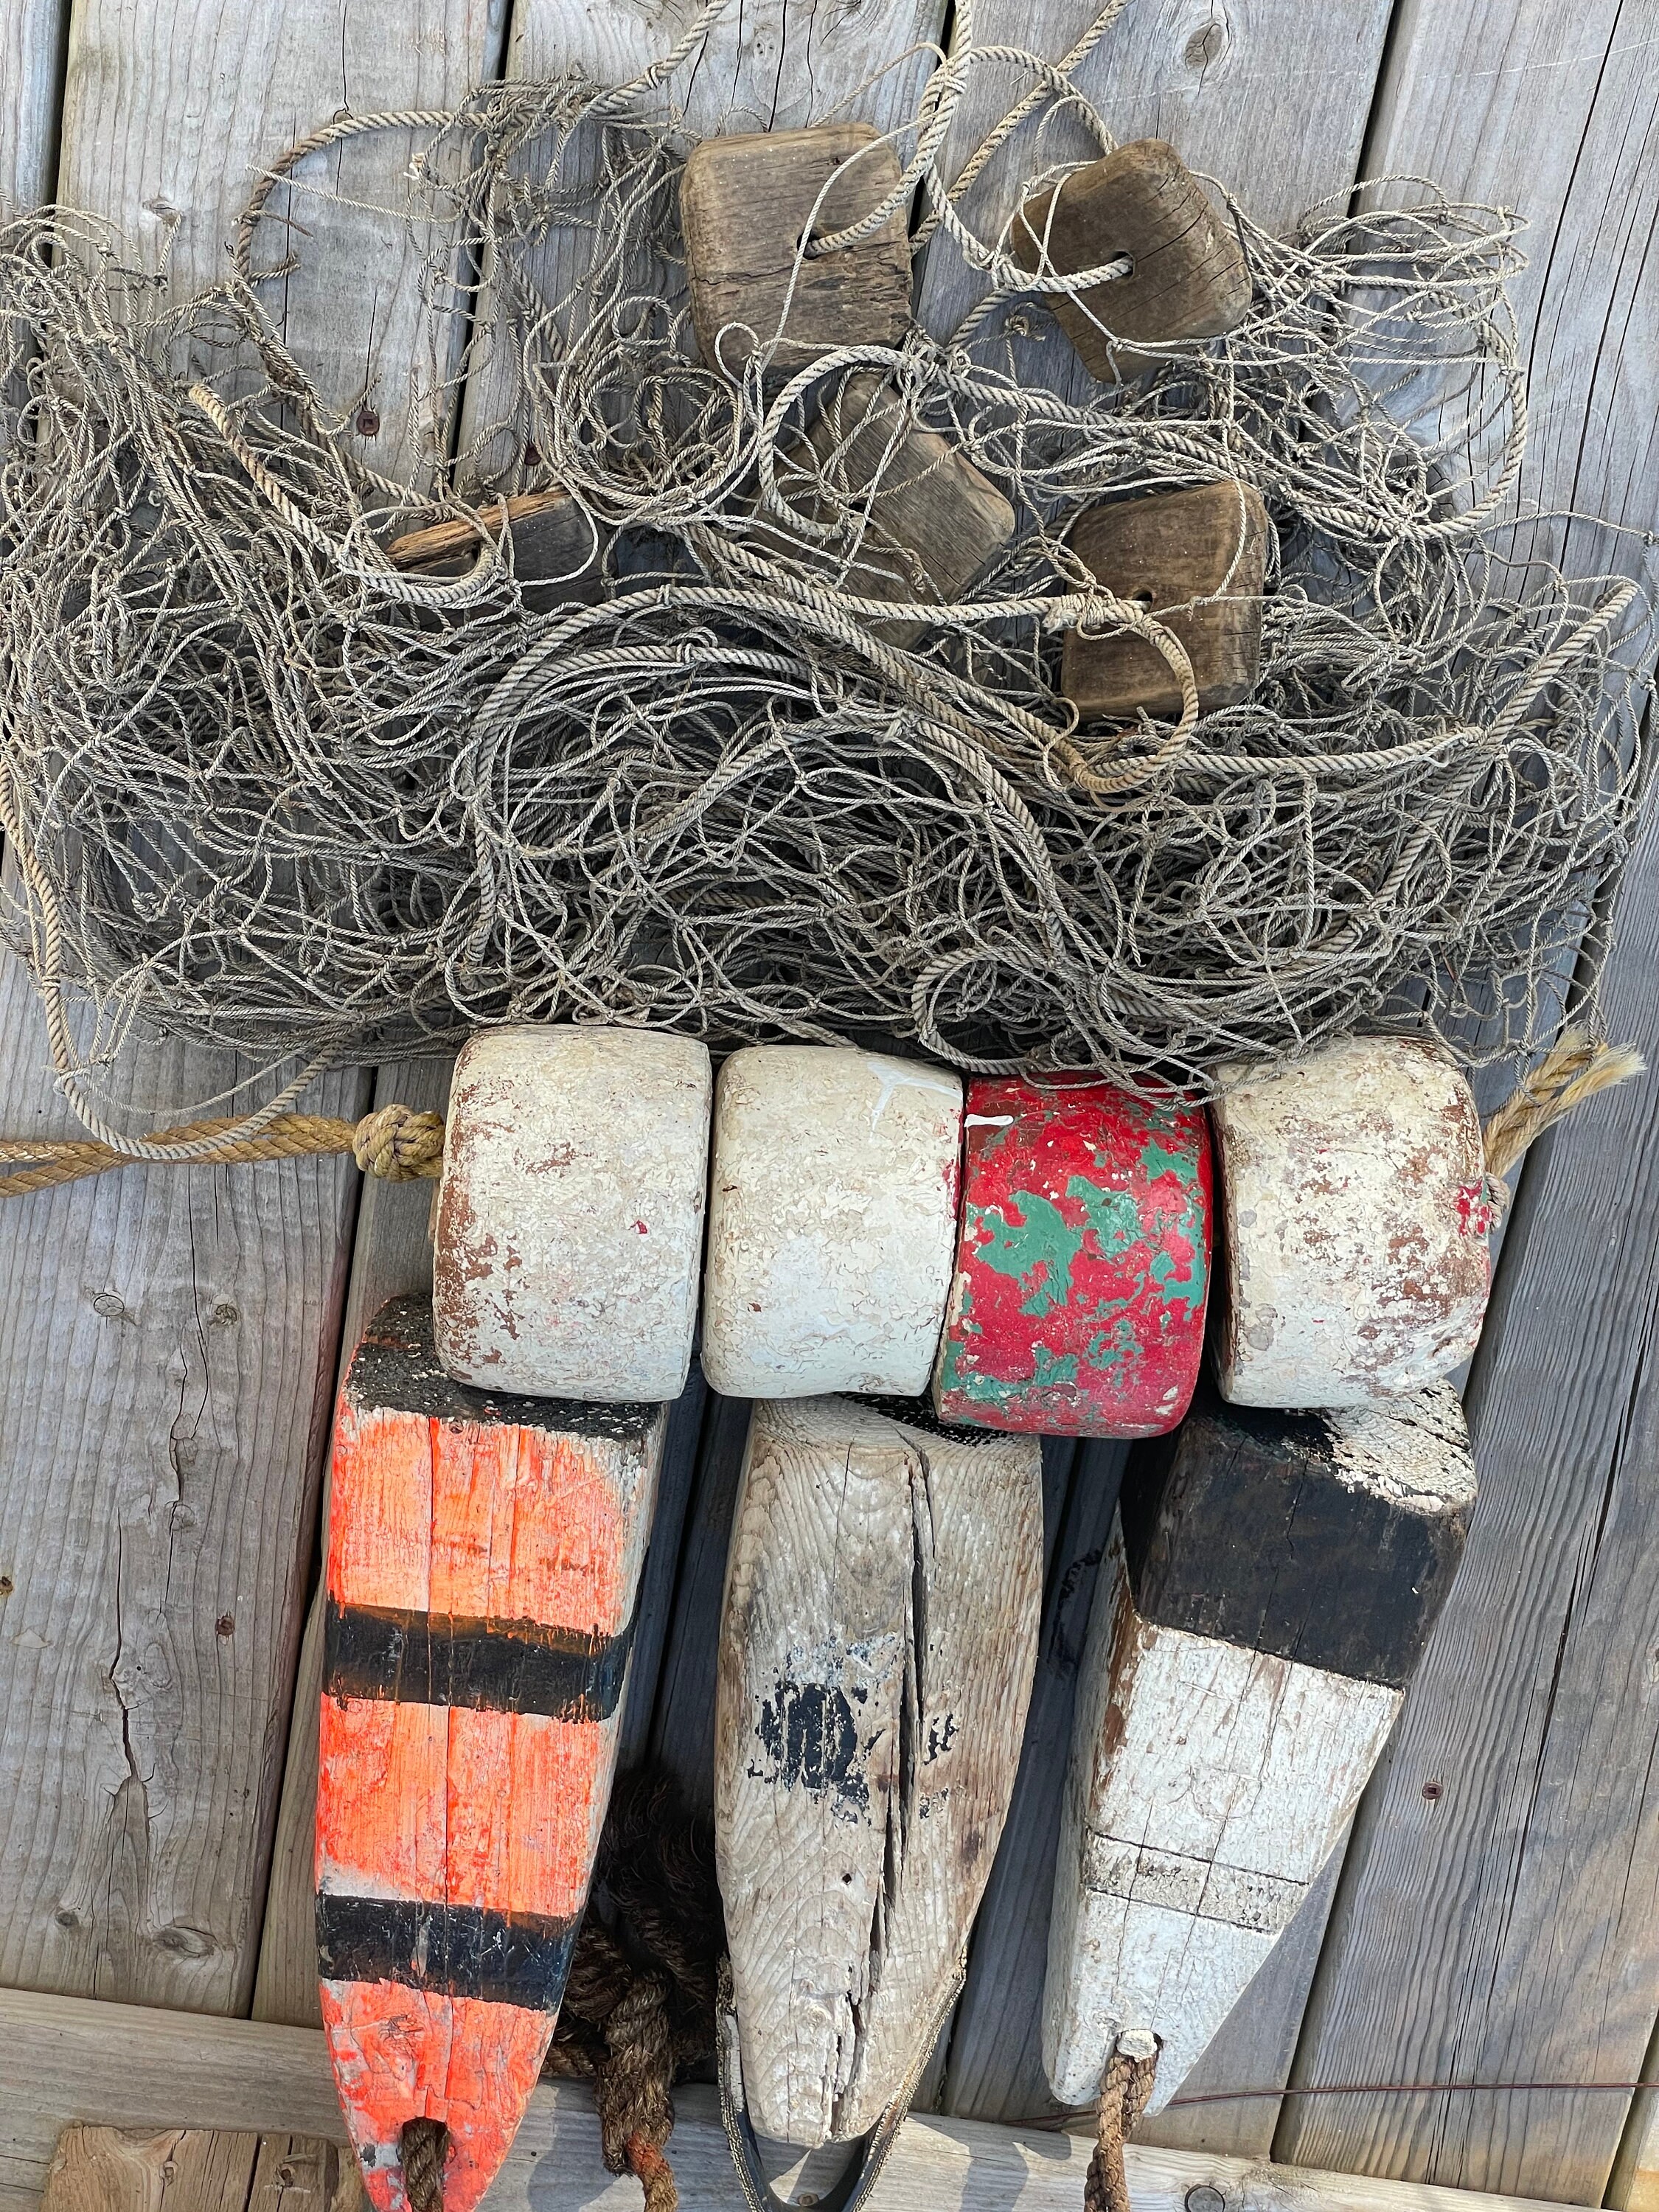 A Small Collection of Antique and Vintage Fishing Buoys, Netting and Floats  From Maritime Canada. 